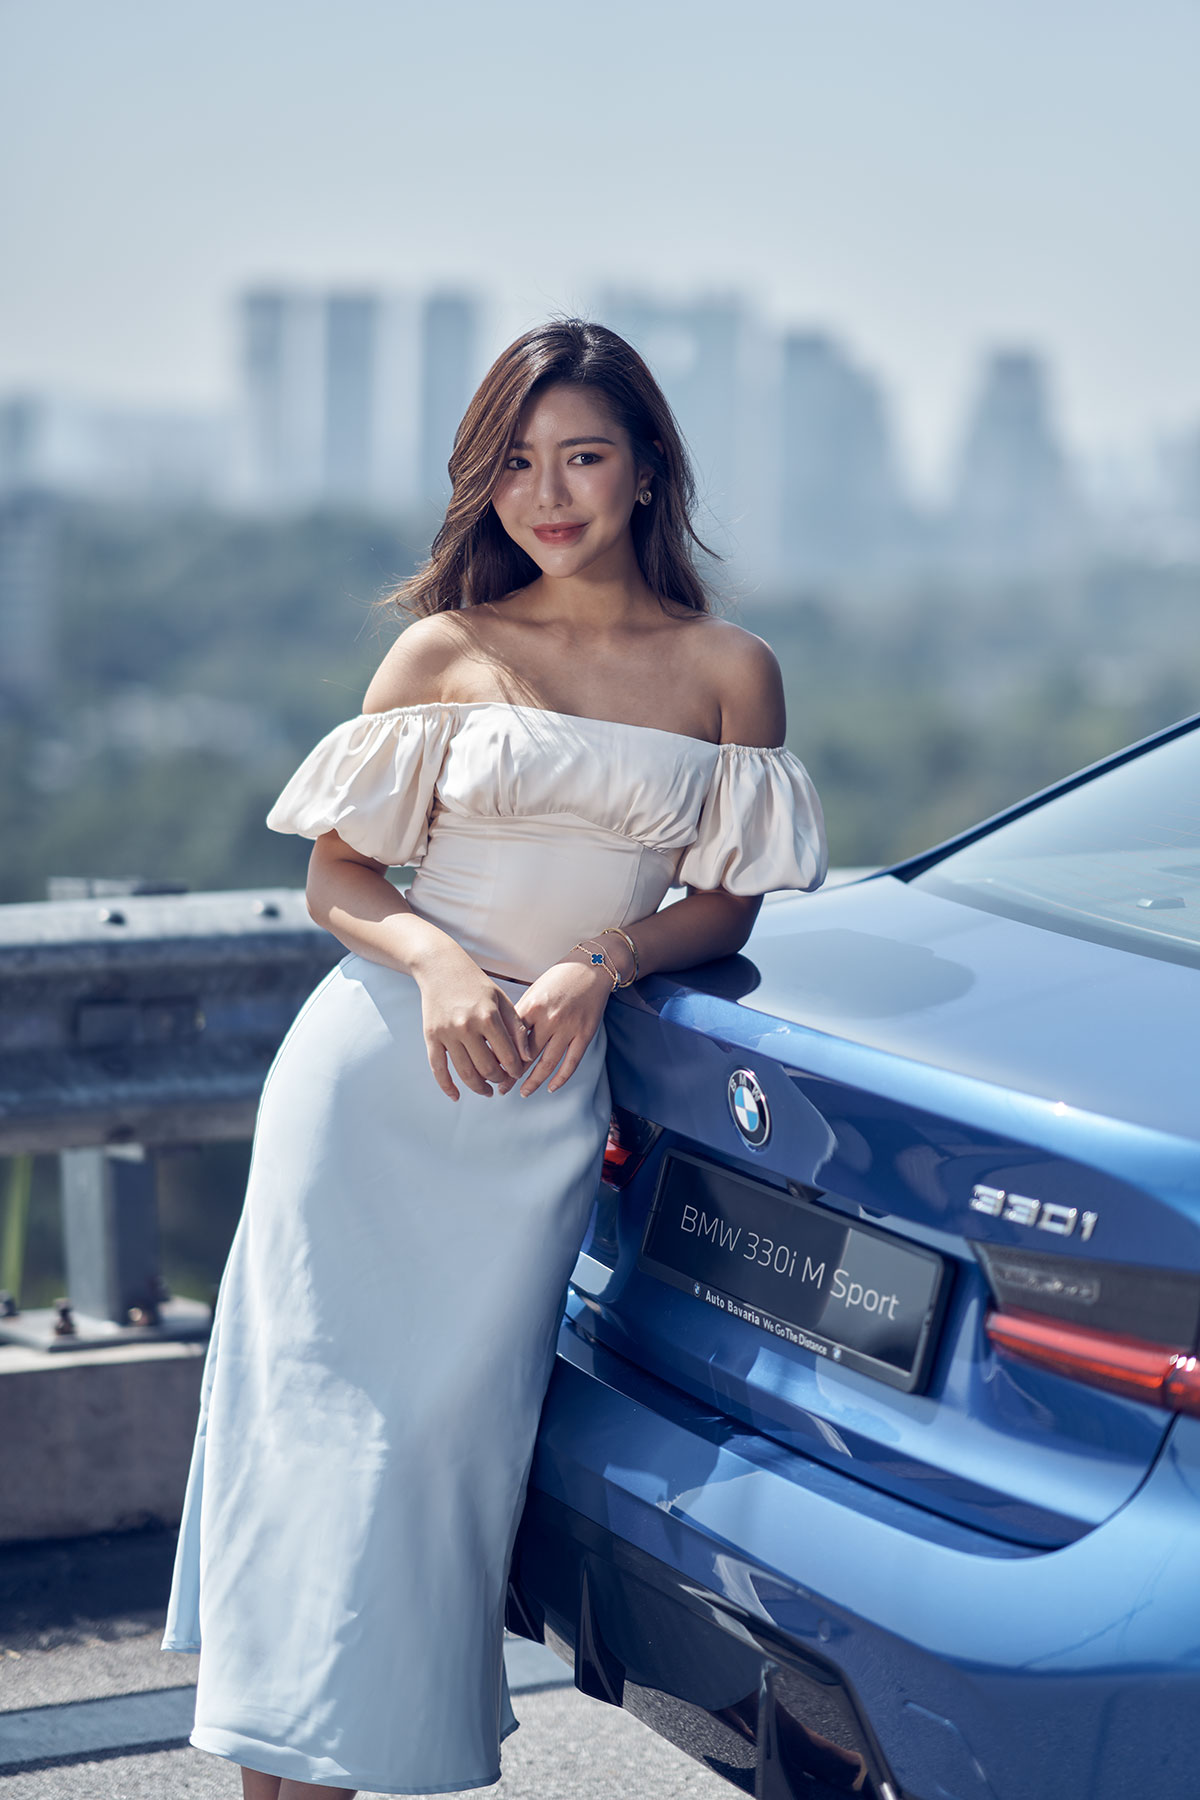 BMW be more woman 